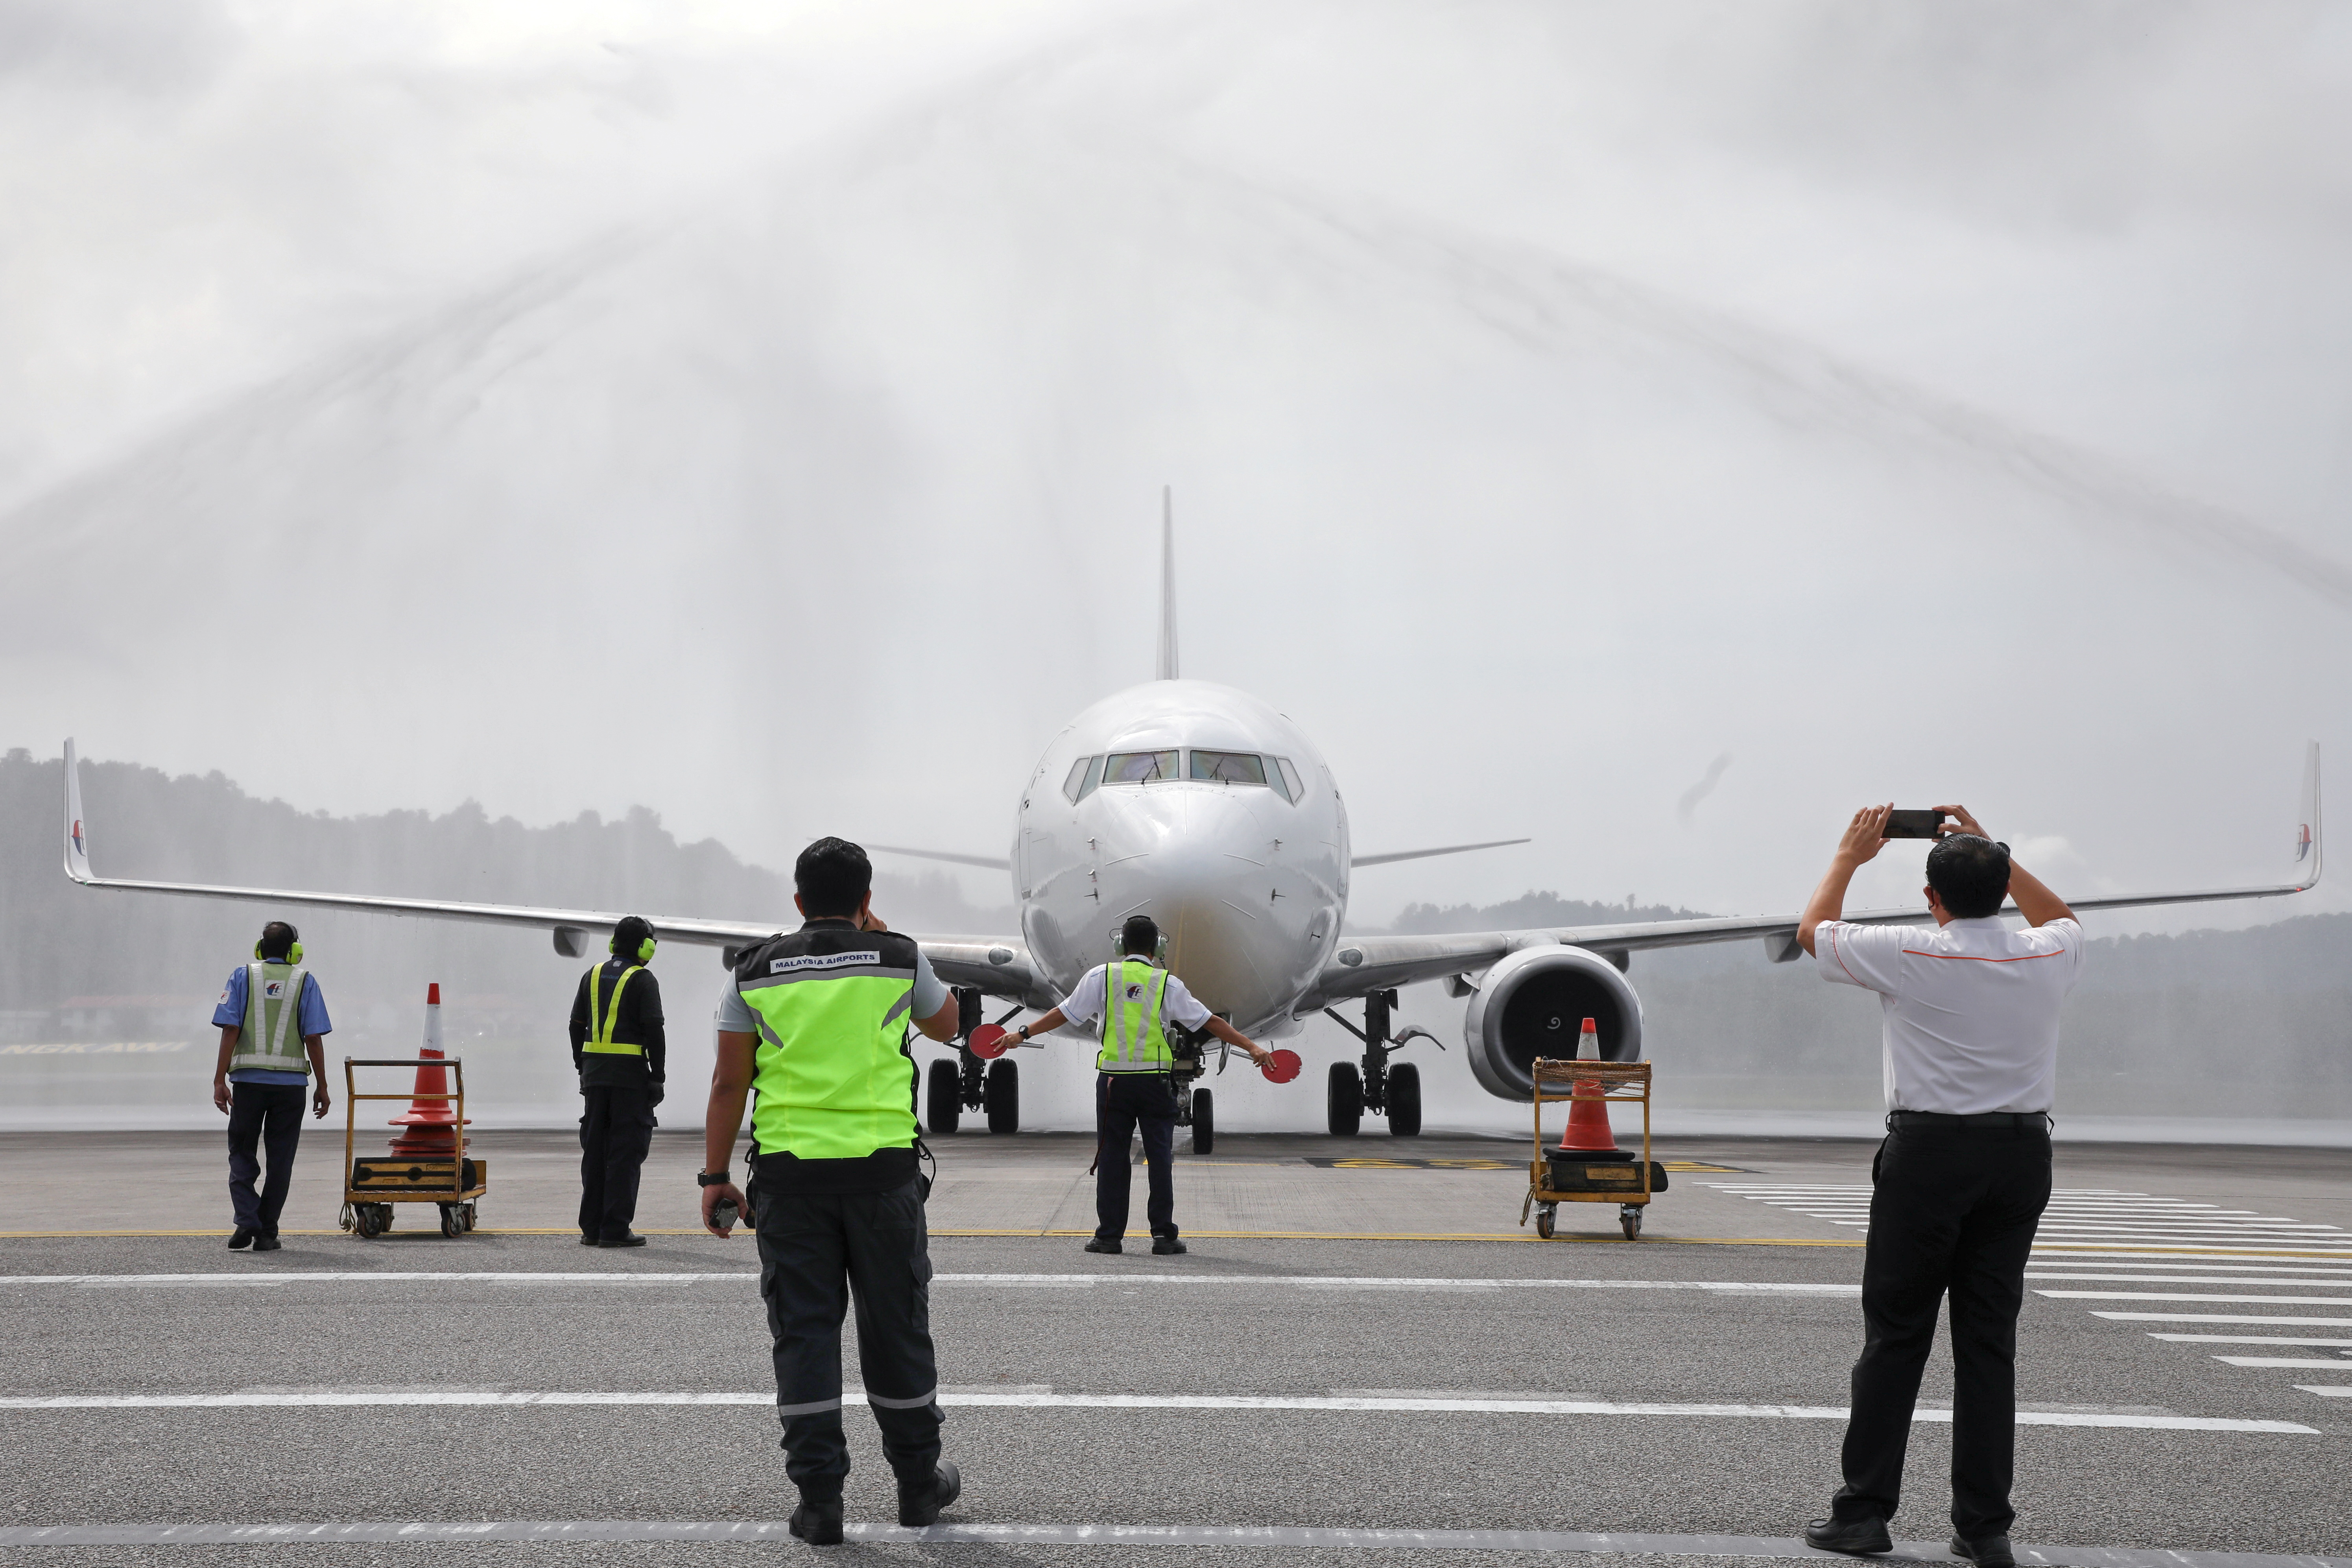 A Malaysia Airlines plane carrying the first batch of tourists receives a water cannon salute from water trucks as Langkawi reopens to domestic tourists, amid the coronavirus disease (COVID-19) pandemic in Malaysia September 16, 2021. REUTERS/Lim Huey Teng